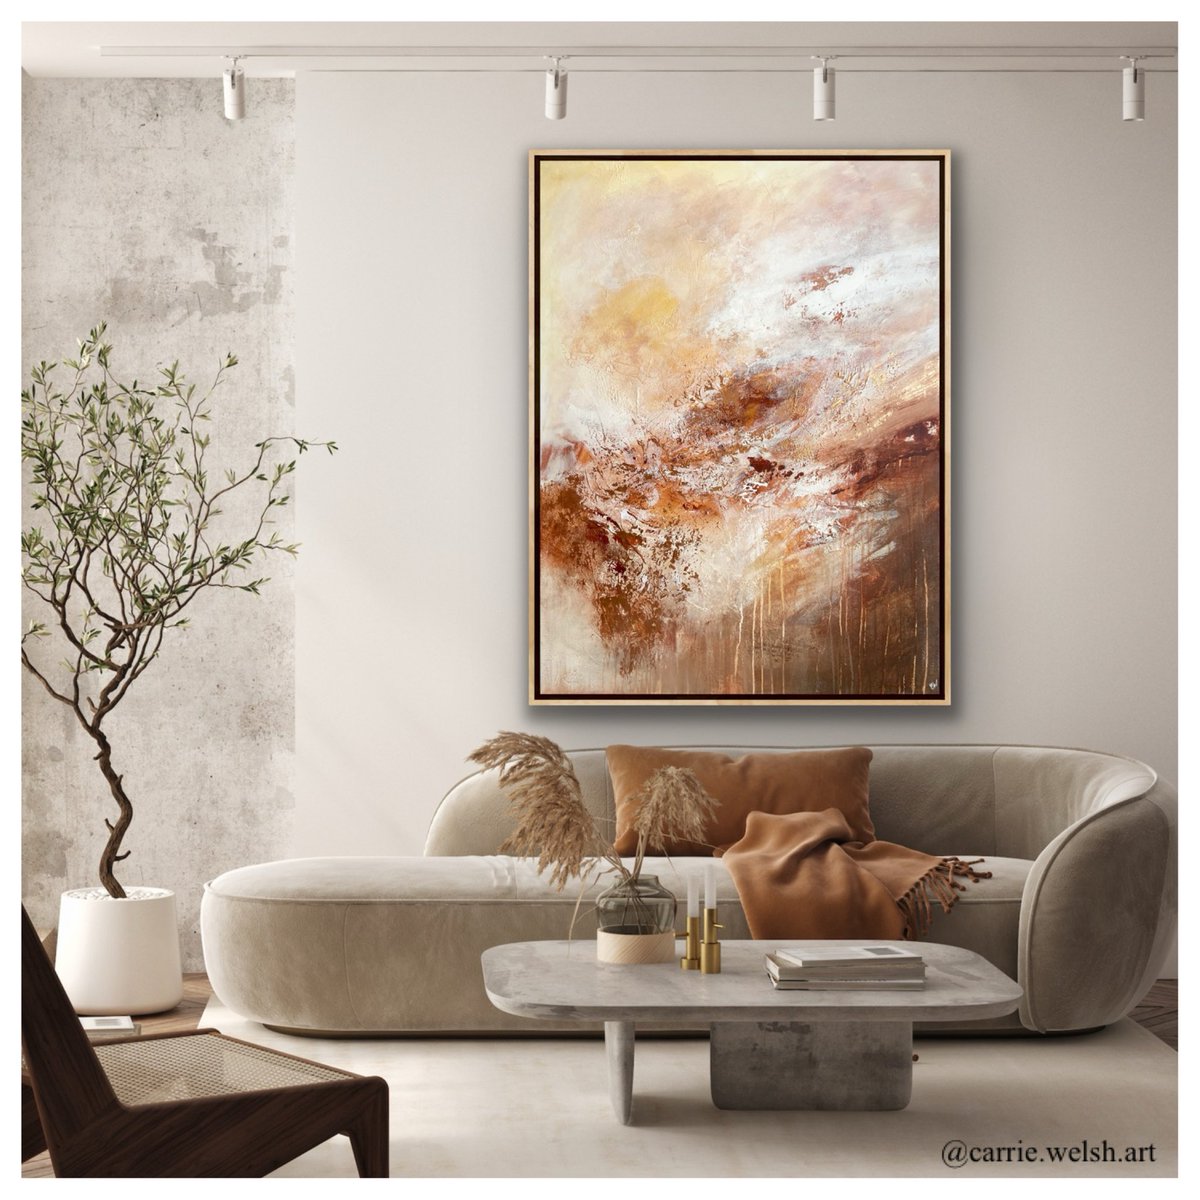 New! “Golden Days” is a beautifully textured abstract landscape painting that has shimmering metallic accents. 121.9 x 91.4 cm. Acrylic on canvas, ready to hang. Frame not included. Afterpay available and free shipping in Australia! 🧡 Shop here: carriewelshart.com.au/collections/or…